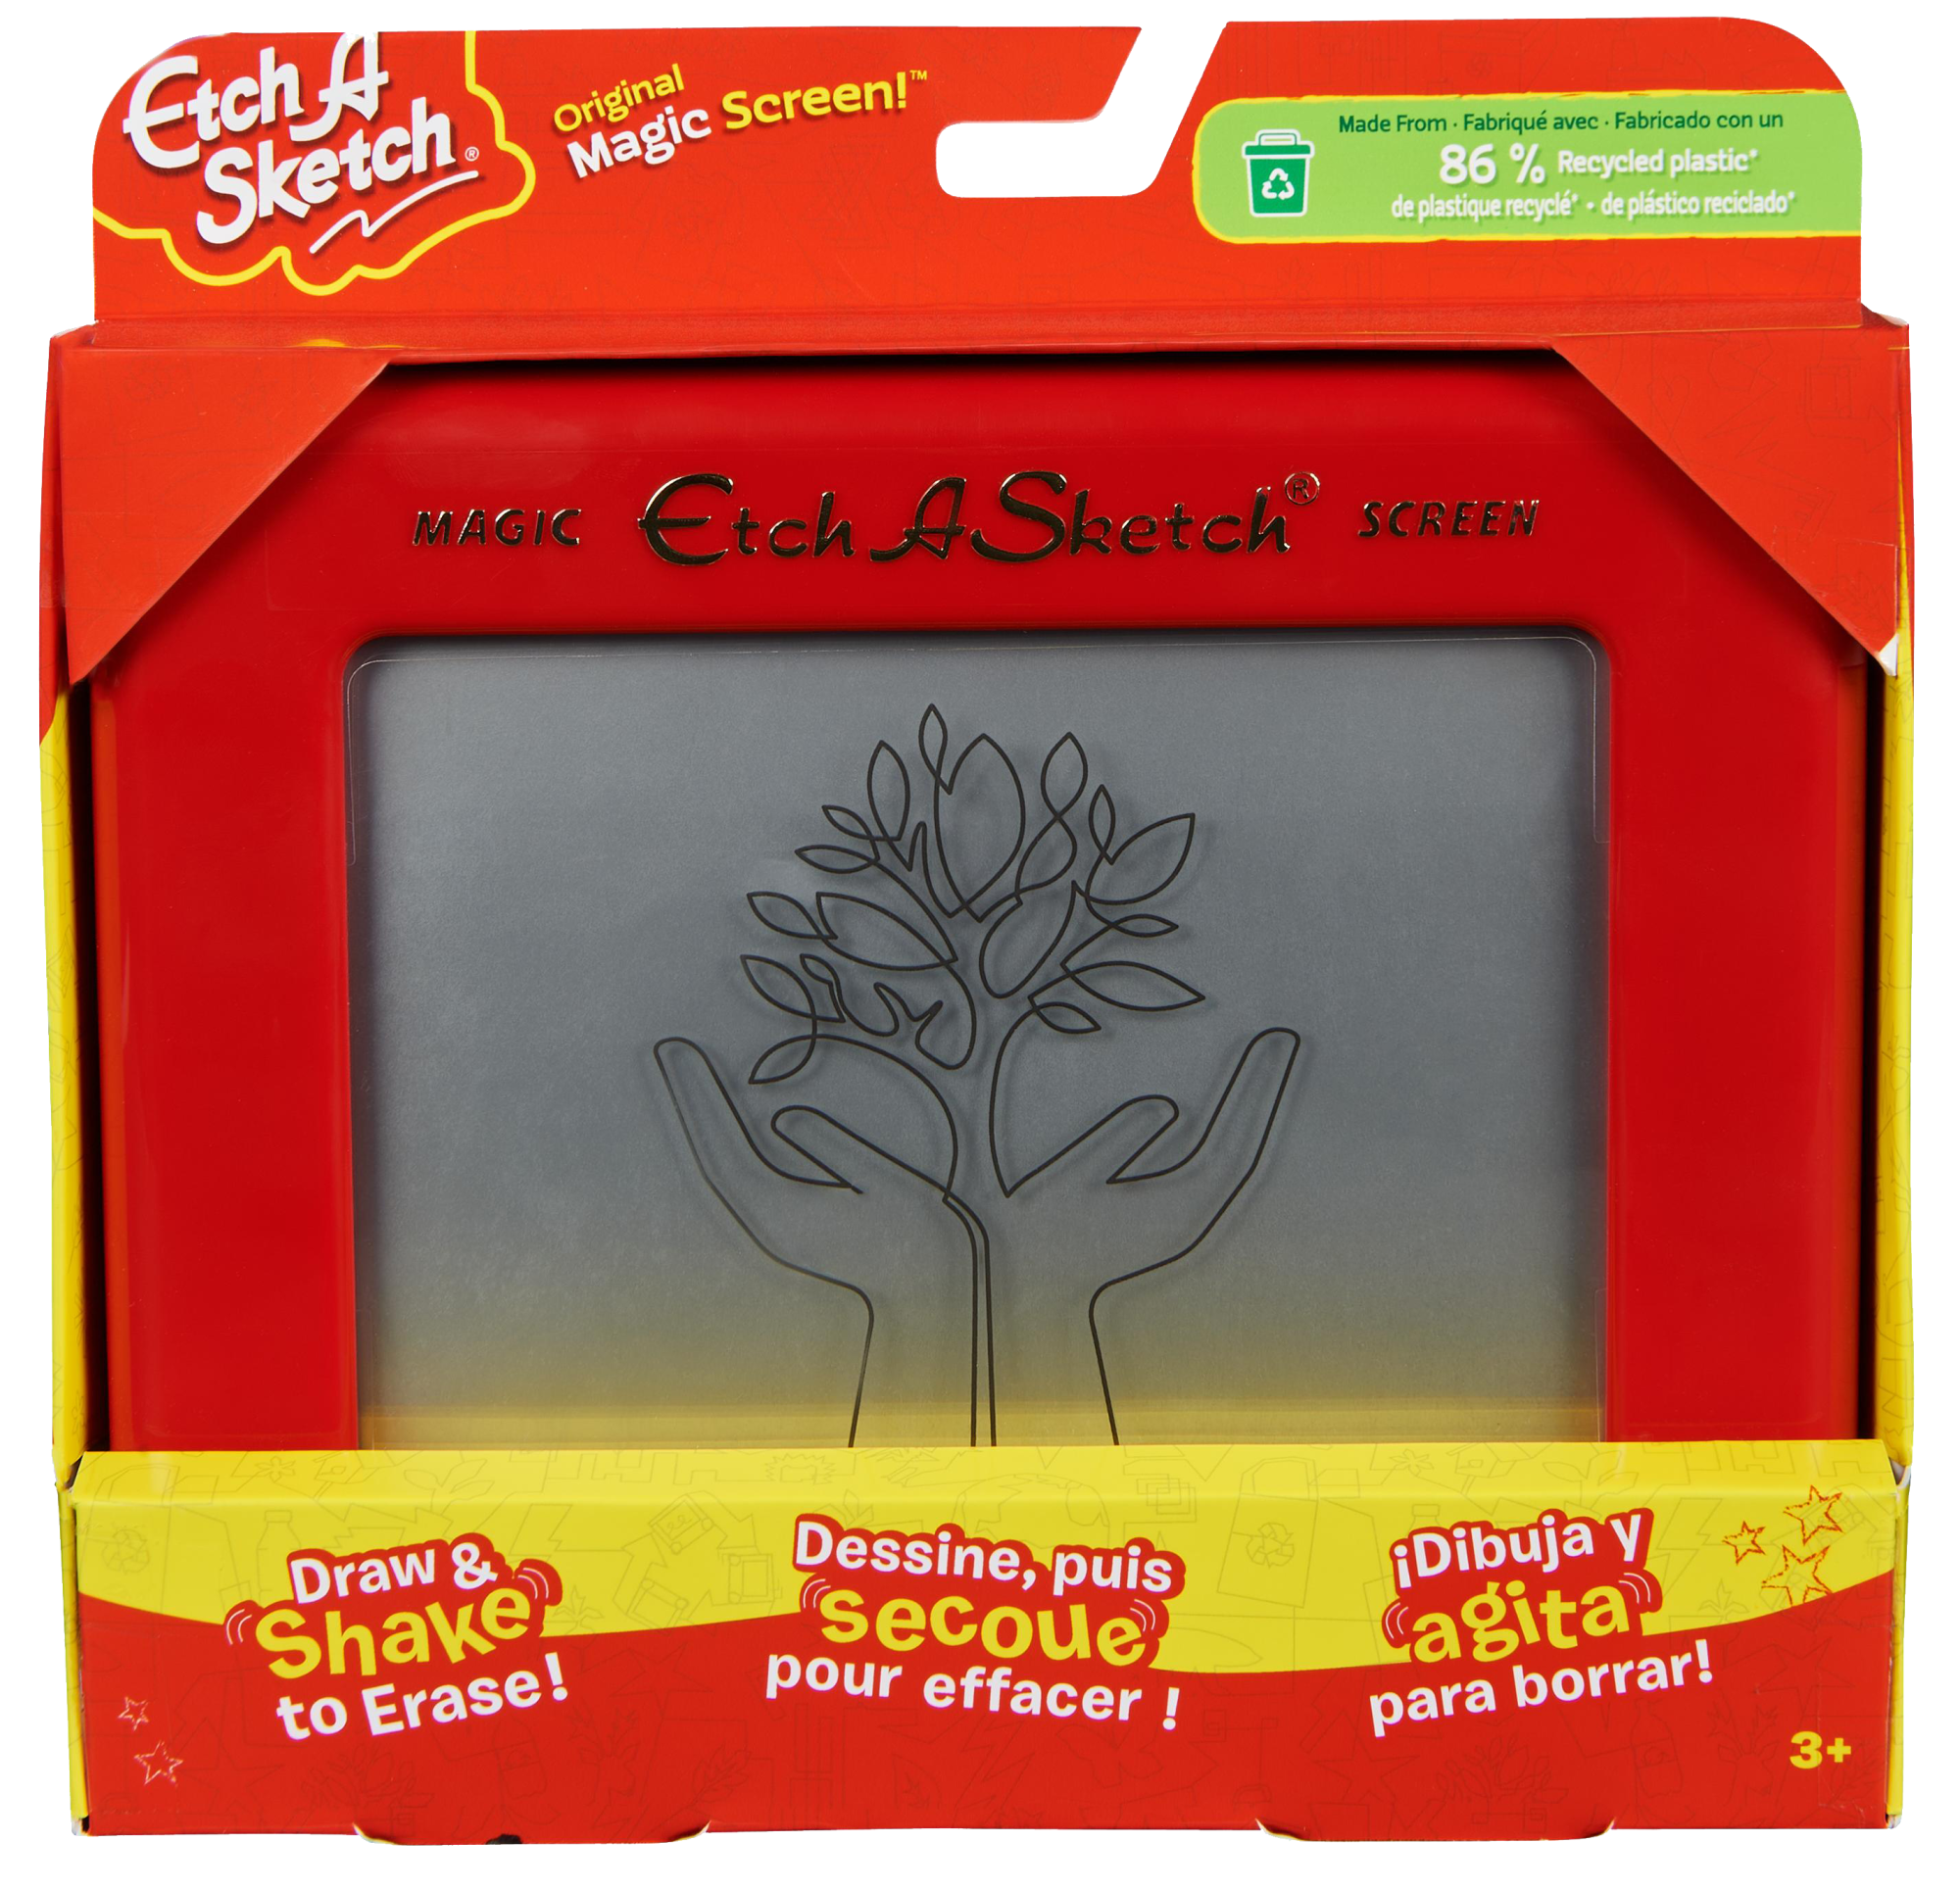 A red Etch A Sketch drawing toy